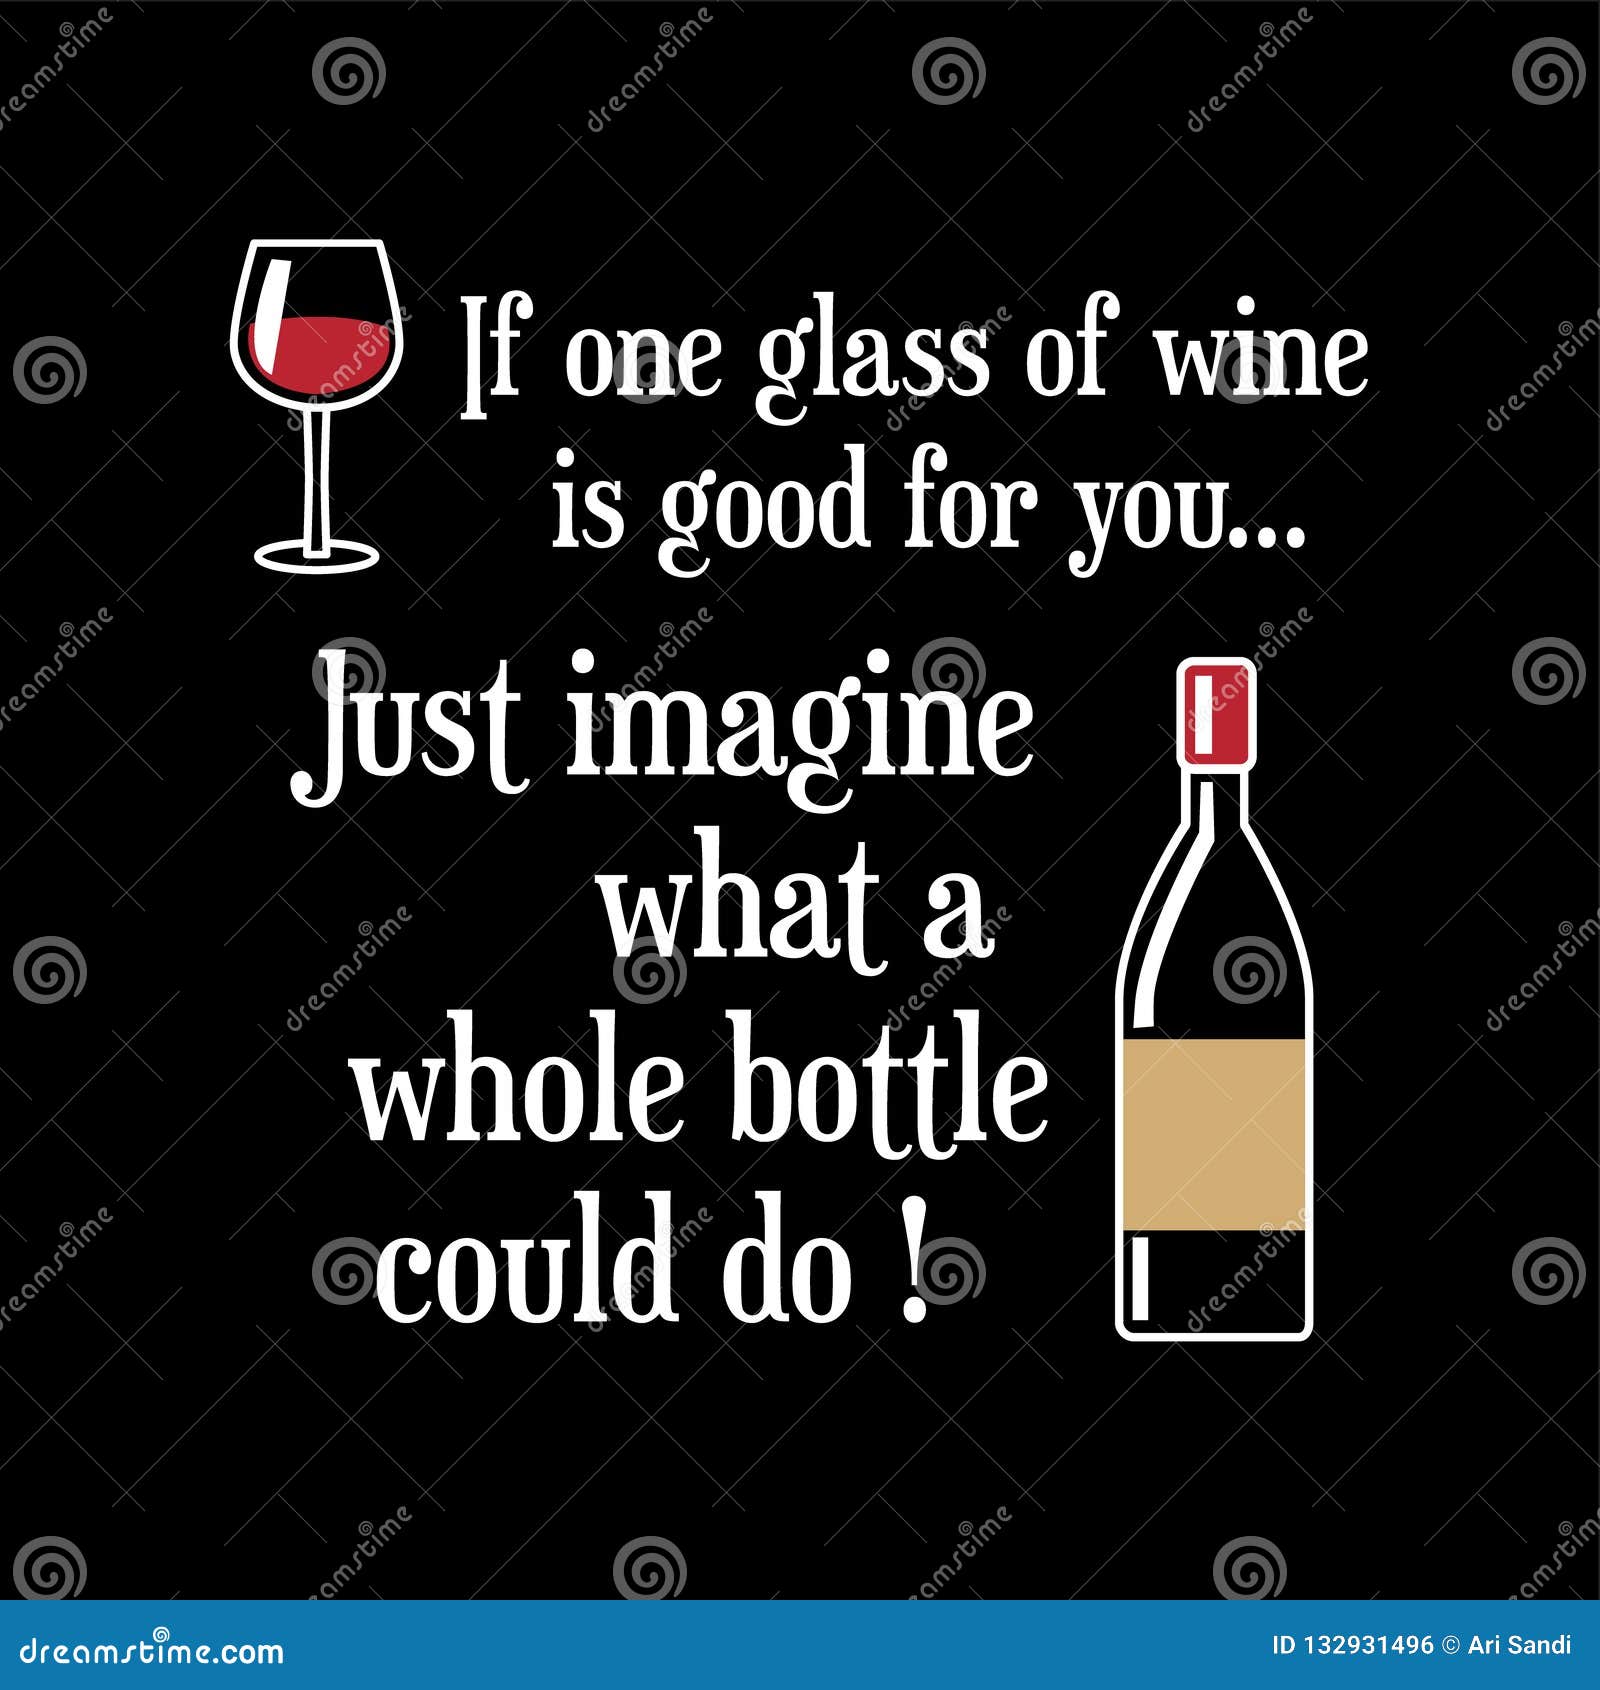 Funny Wine Quote And Saying. Stock Vector - Illustration of quotes ...